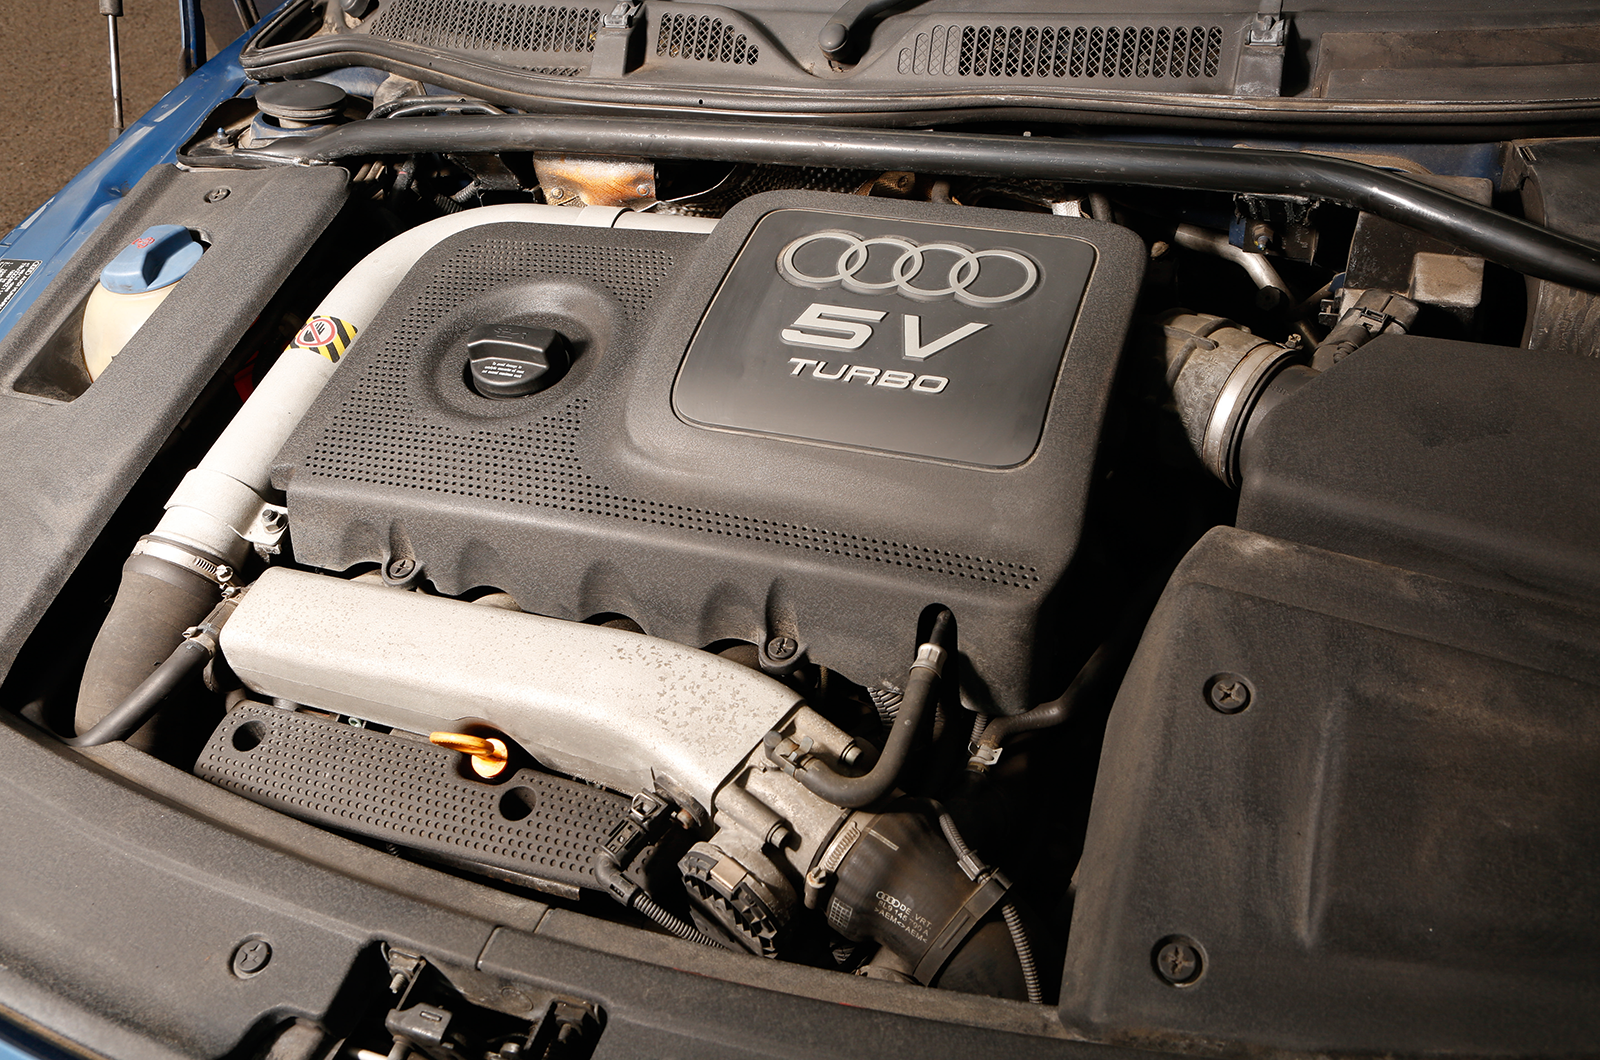 Audi TT (Mk1) buyer's guide: what to pay and what to look for